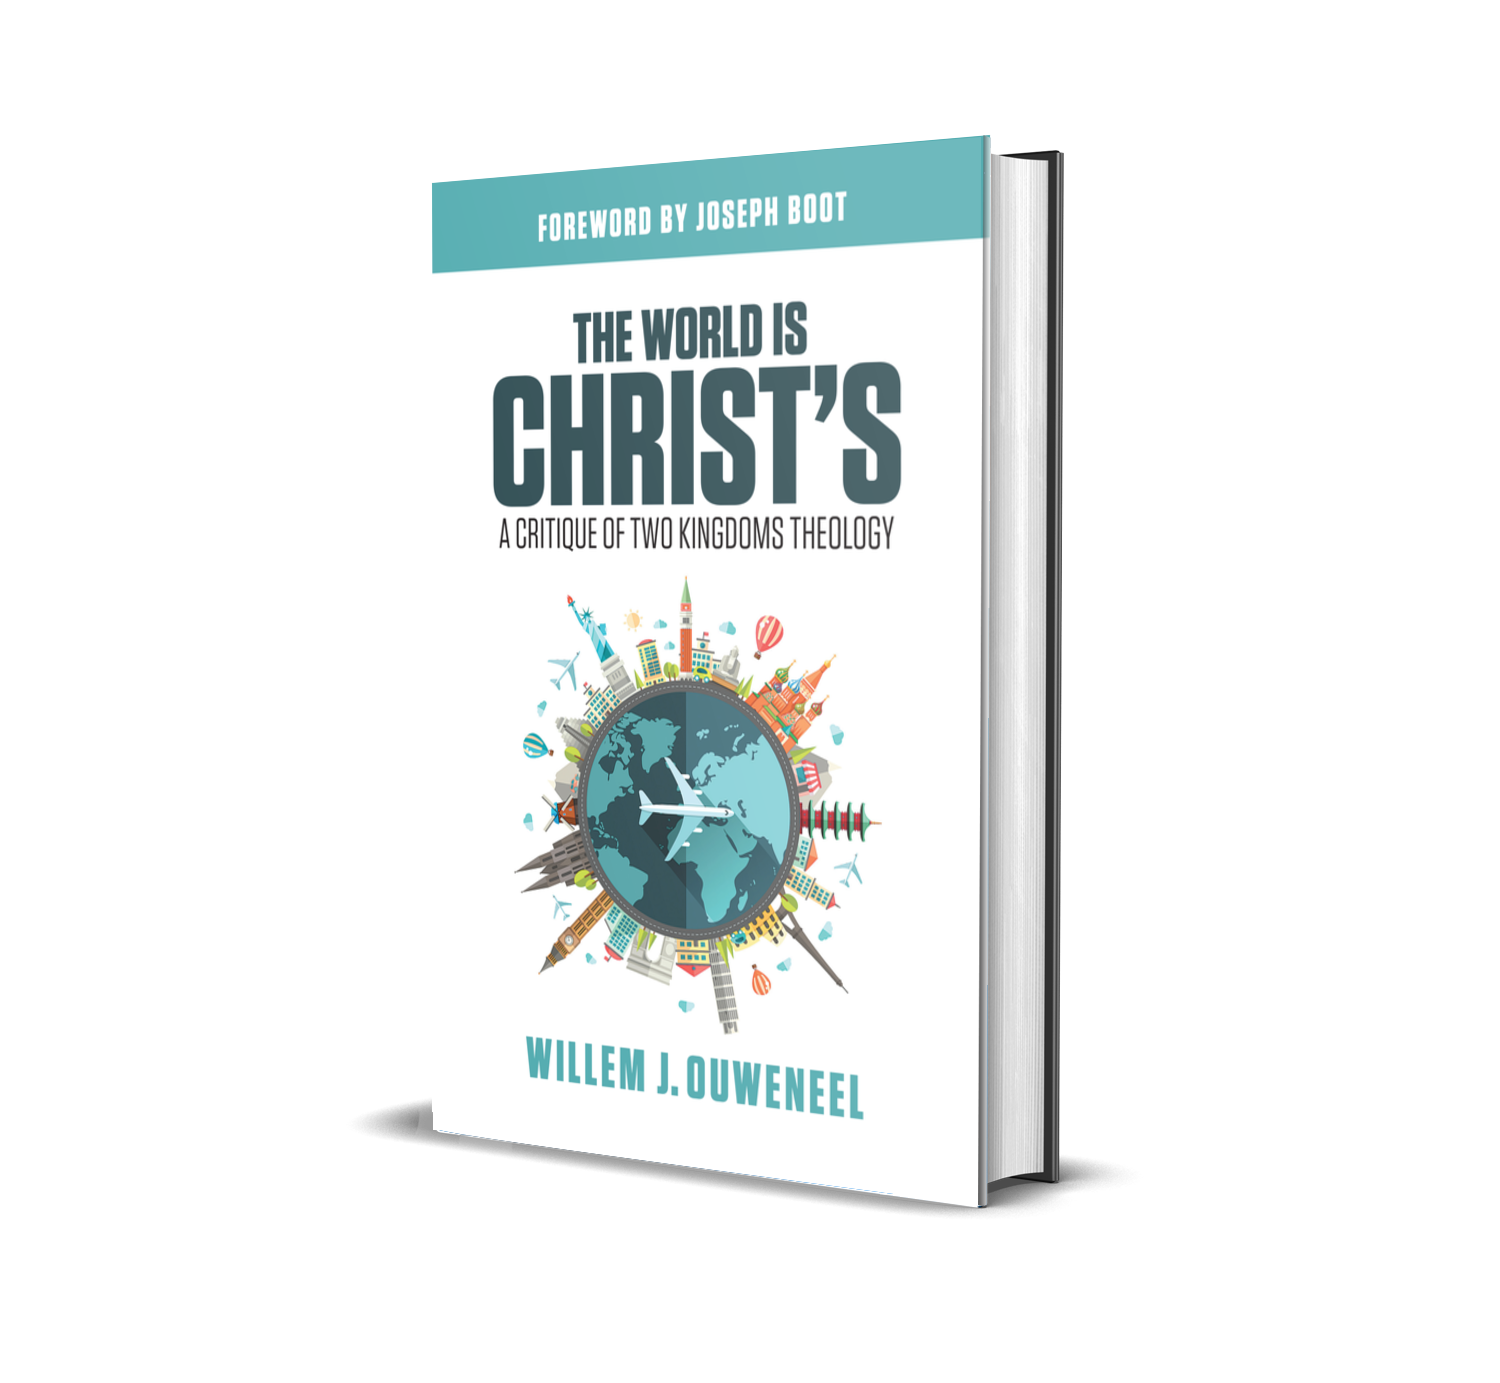 The World is Christ's: A Critique of Two Kingdoms Theology.